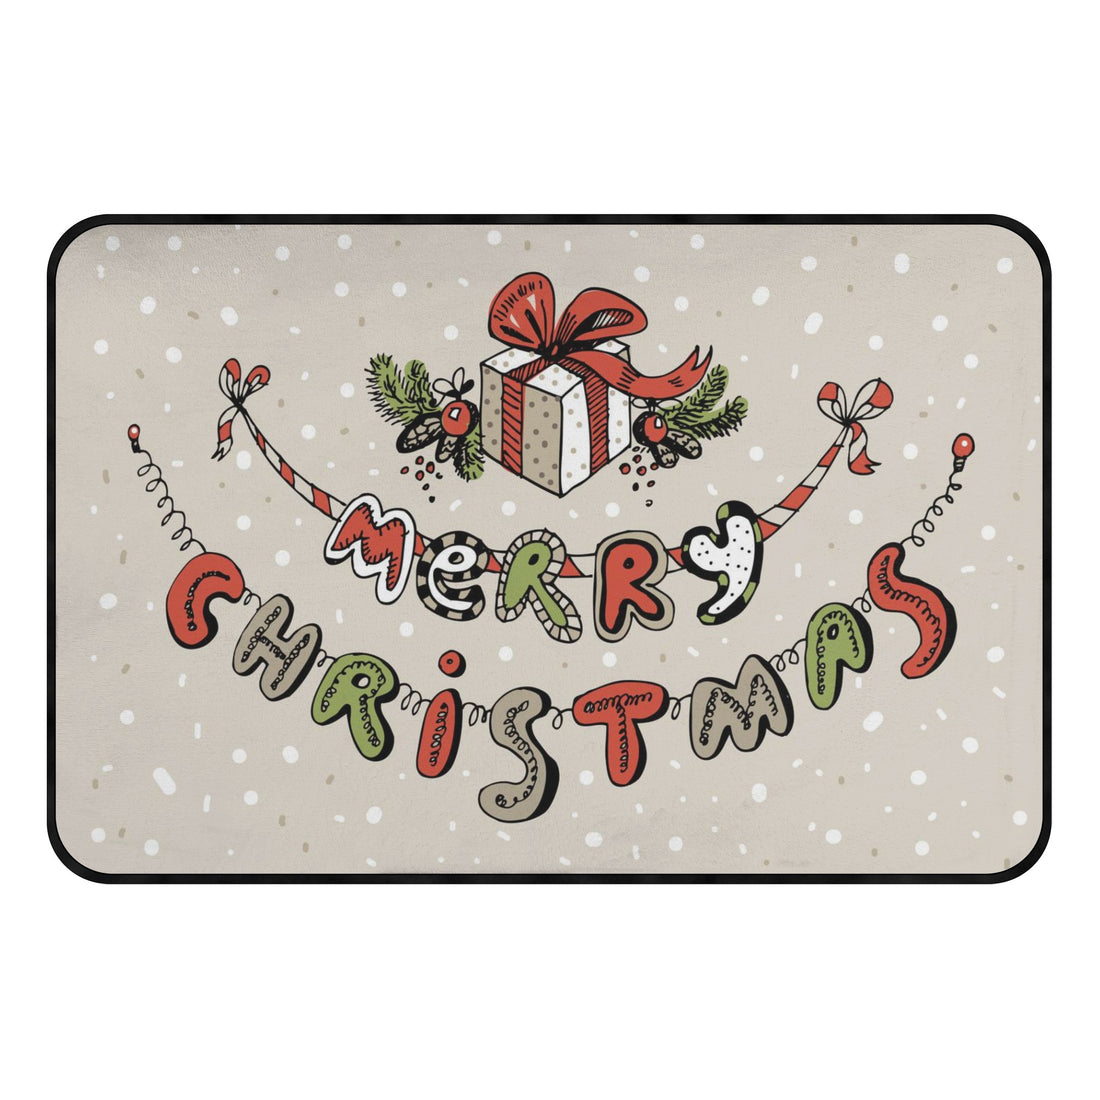 Non-slip Room Rug, Doormat Merry Christmas Home-clothes-jewelry